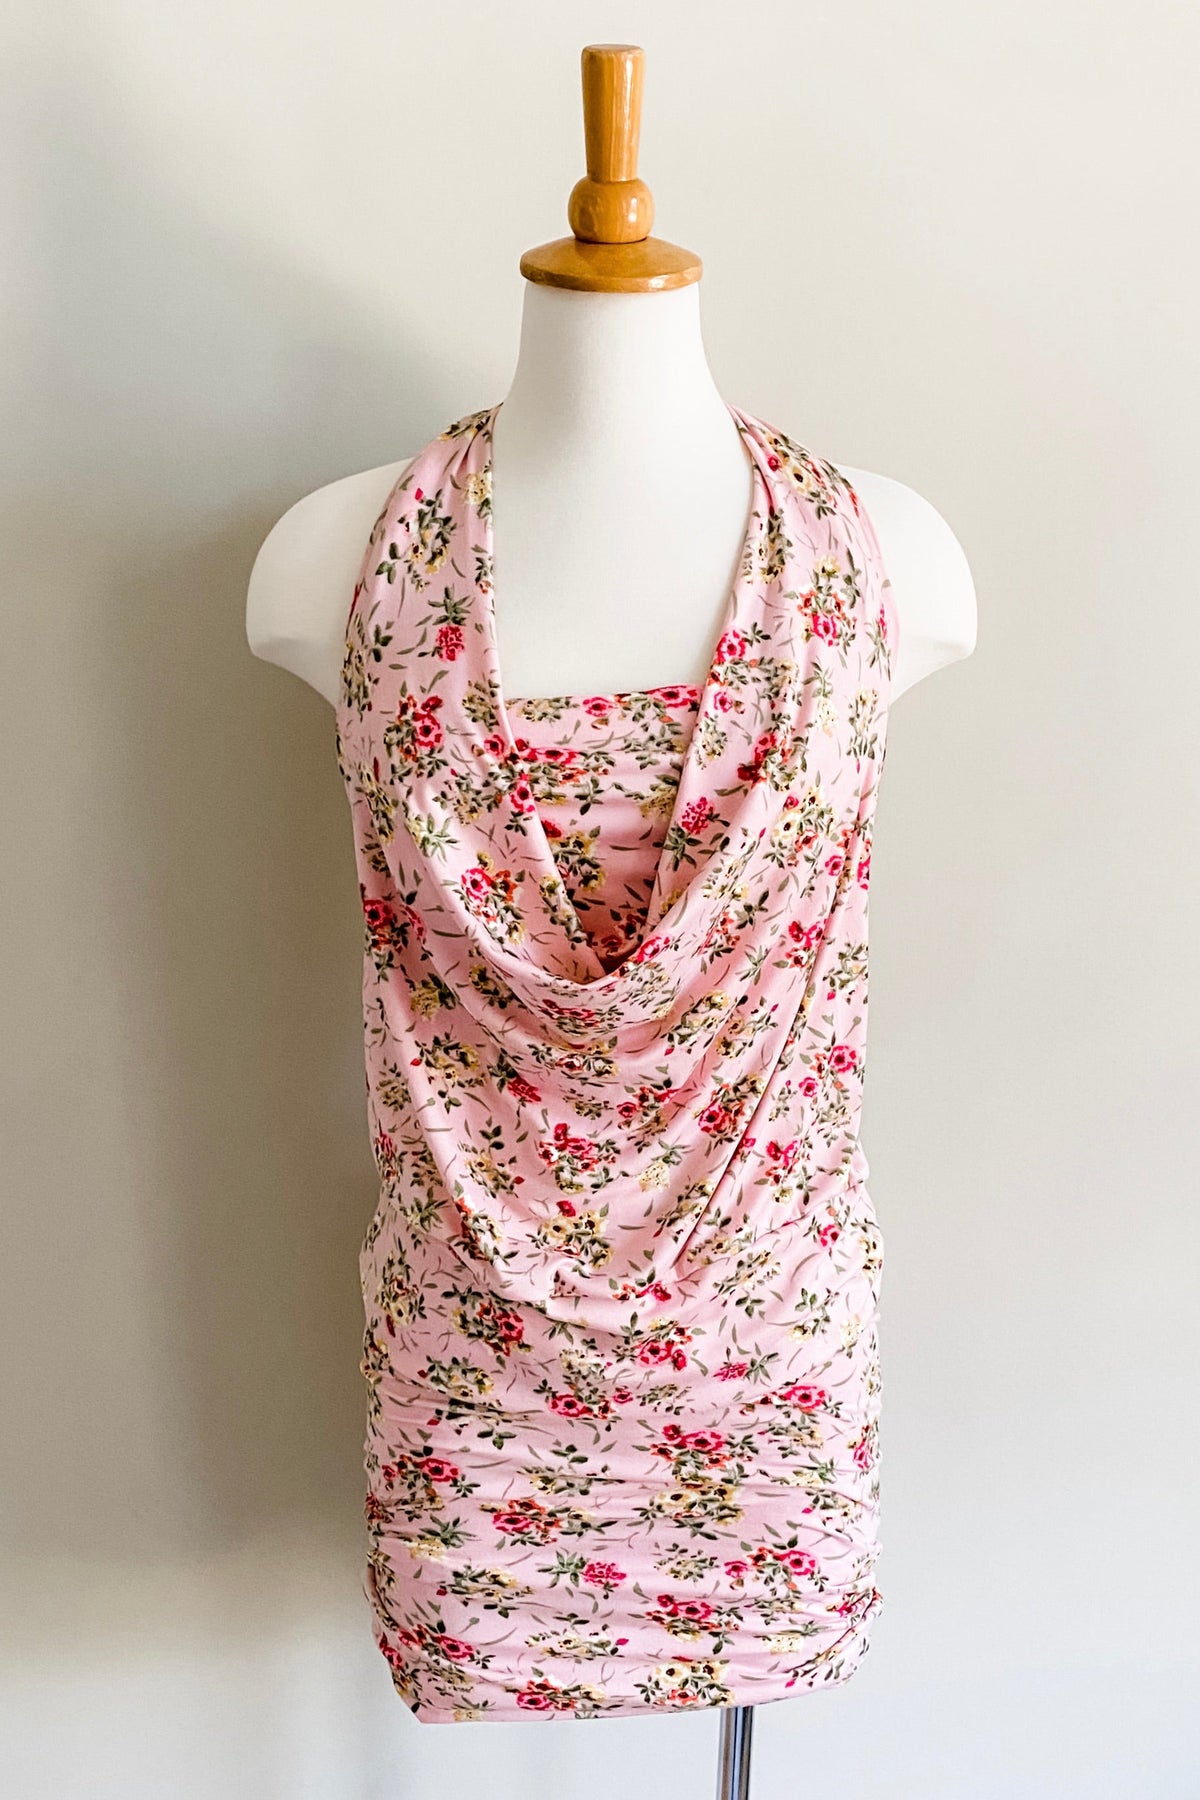 Diane Kroe One-4-All Top (Baby Pink Floral) - Warm Weather Capsule Collection